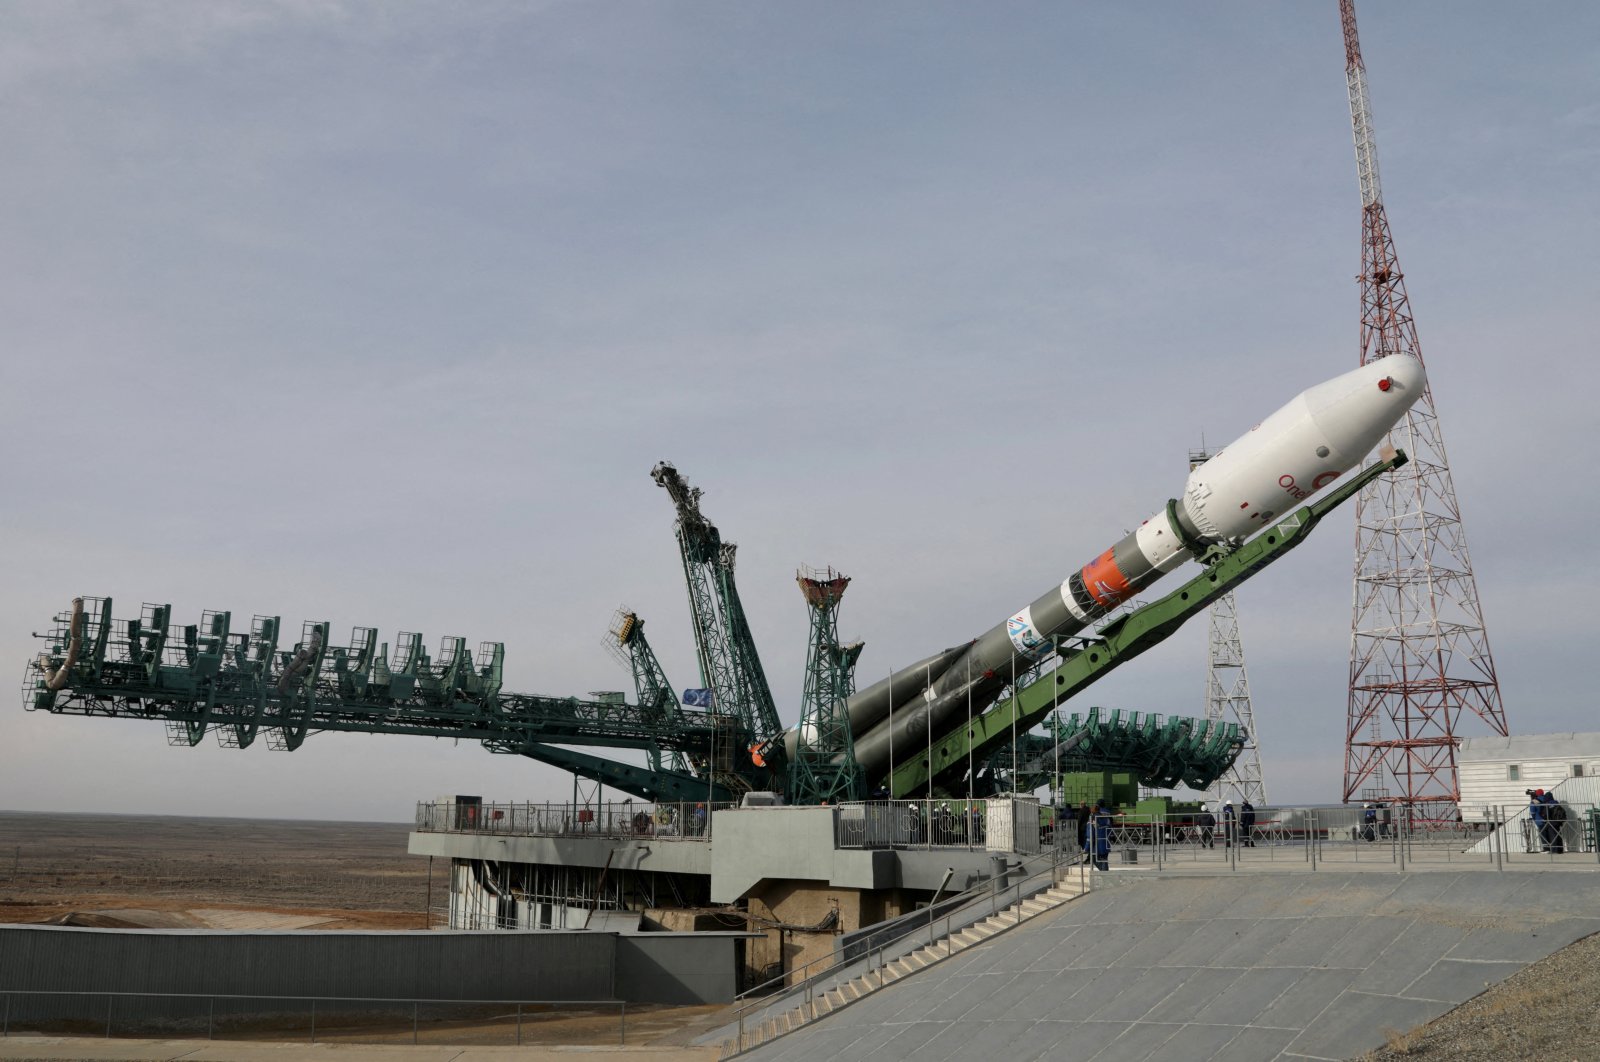 A Soyuz-2.1b rocket booster with a Fregat upper stage and satellites of British firm OneWeb is removed from a launchpad after the launch was cancelled at the Baikonur Cosmodrome, Kazakhstan, March 4, 2022. (Reuters Photo)